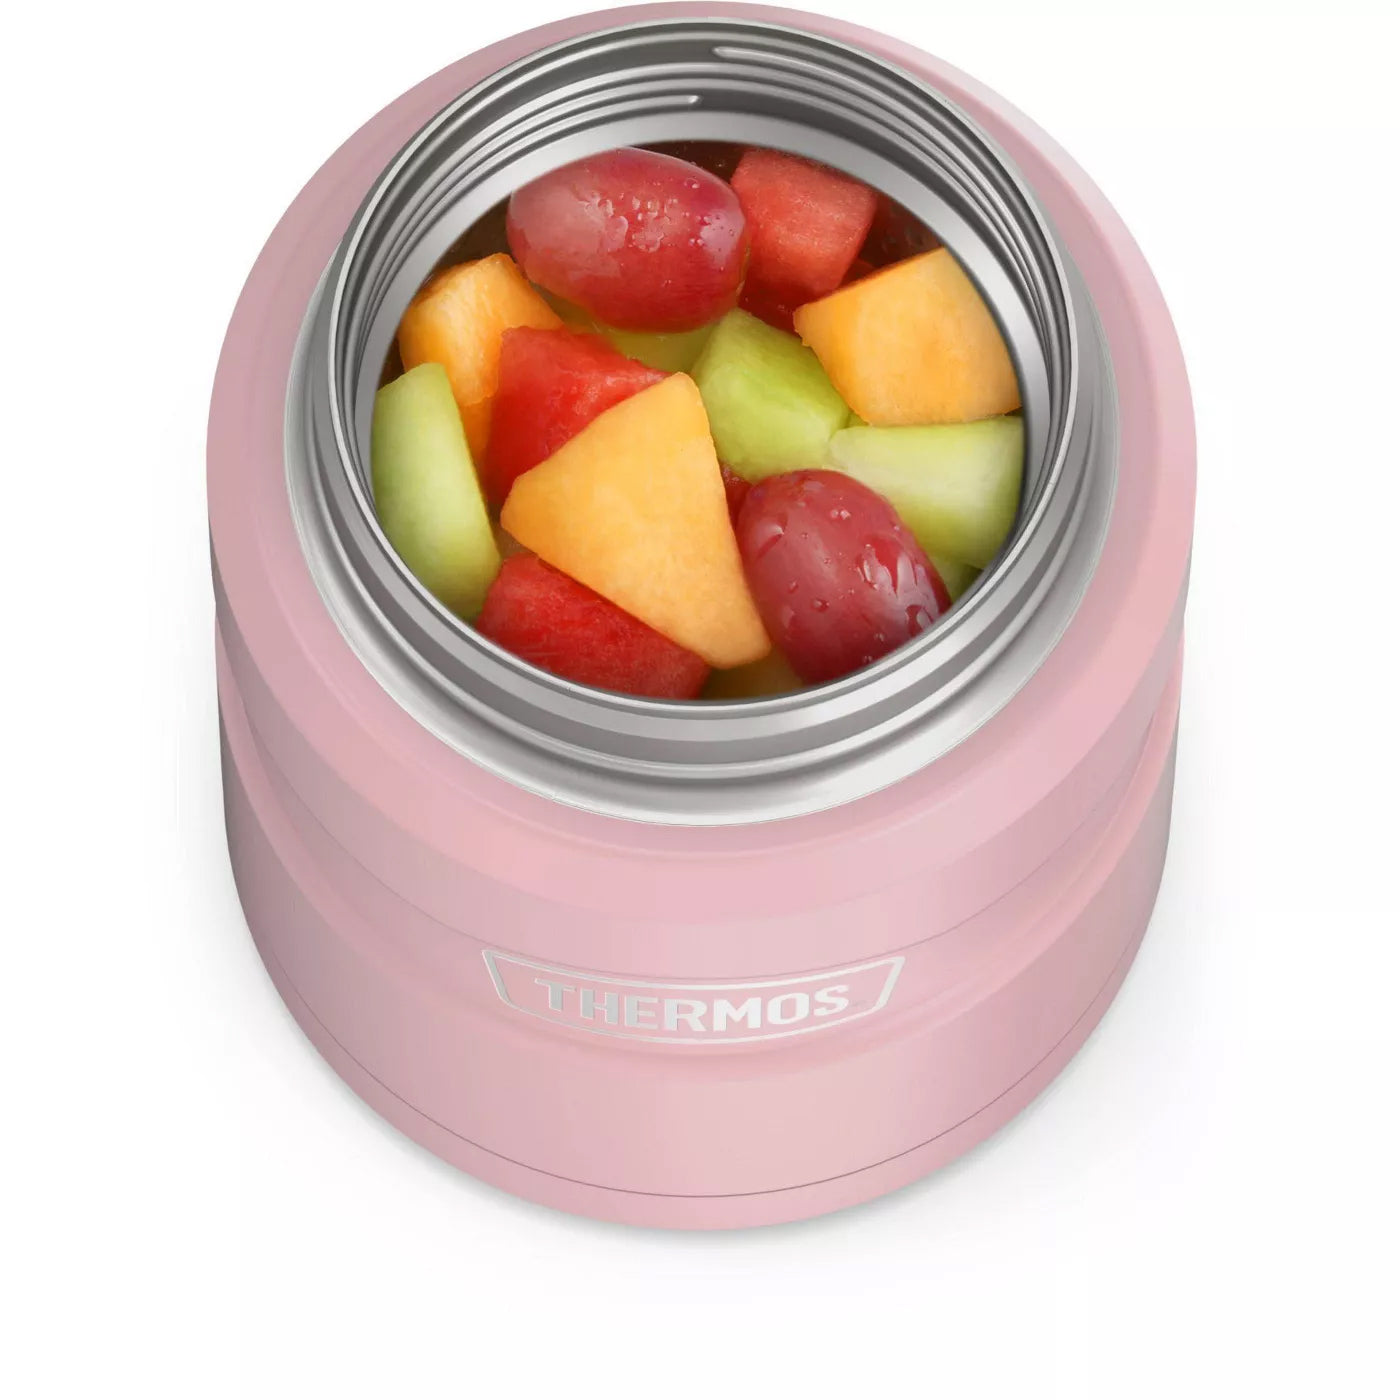 THERMOS Stainless King Vacuum-Insulated Food Jar with Spoon, 16 Ounce, –  S&D Kids